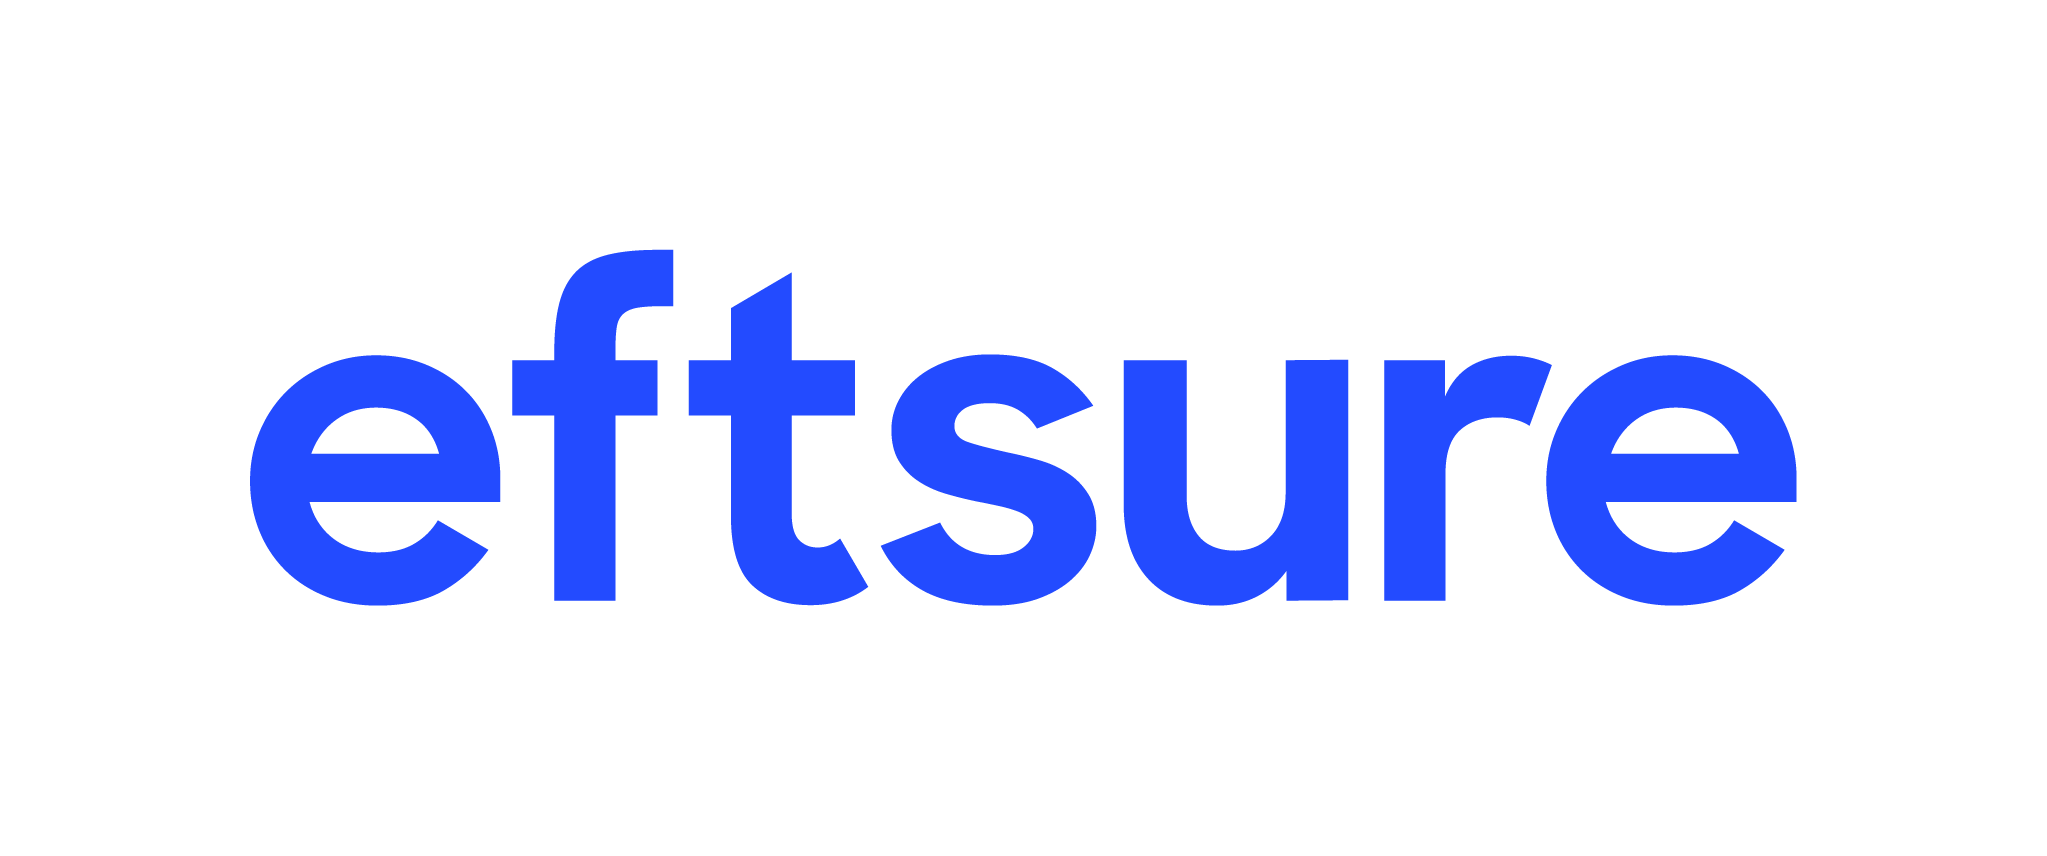 March 2023 Eftsure supplier payment system logo 